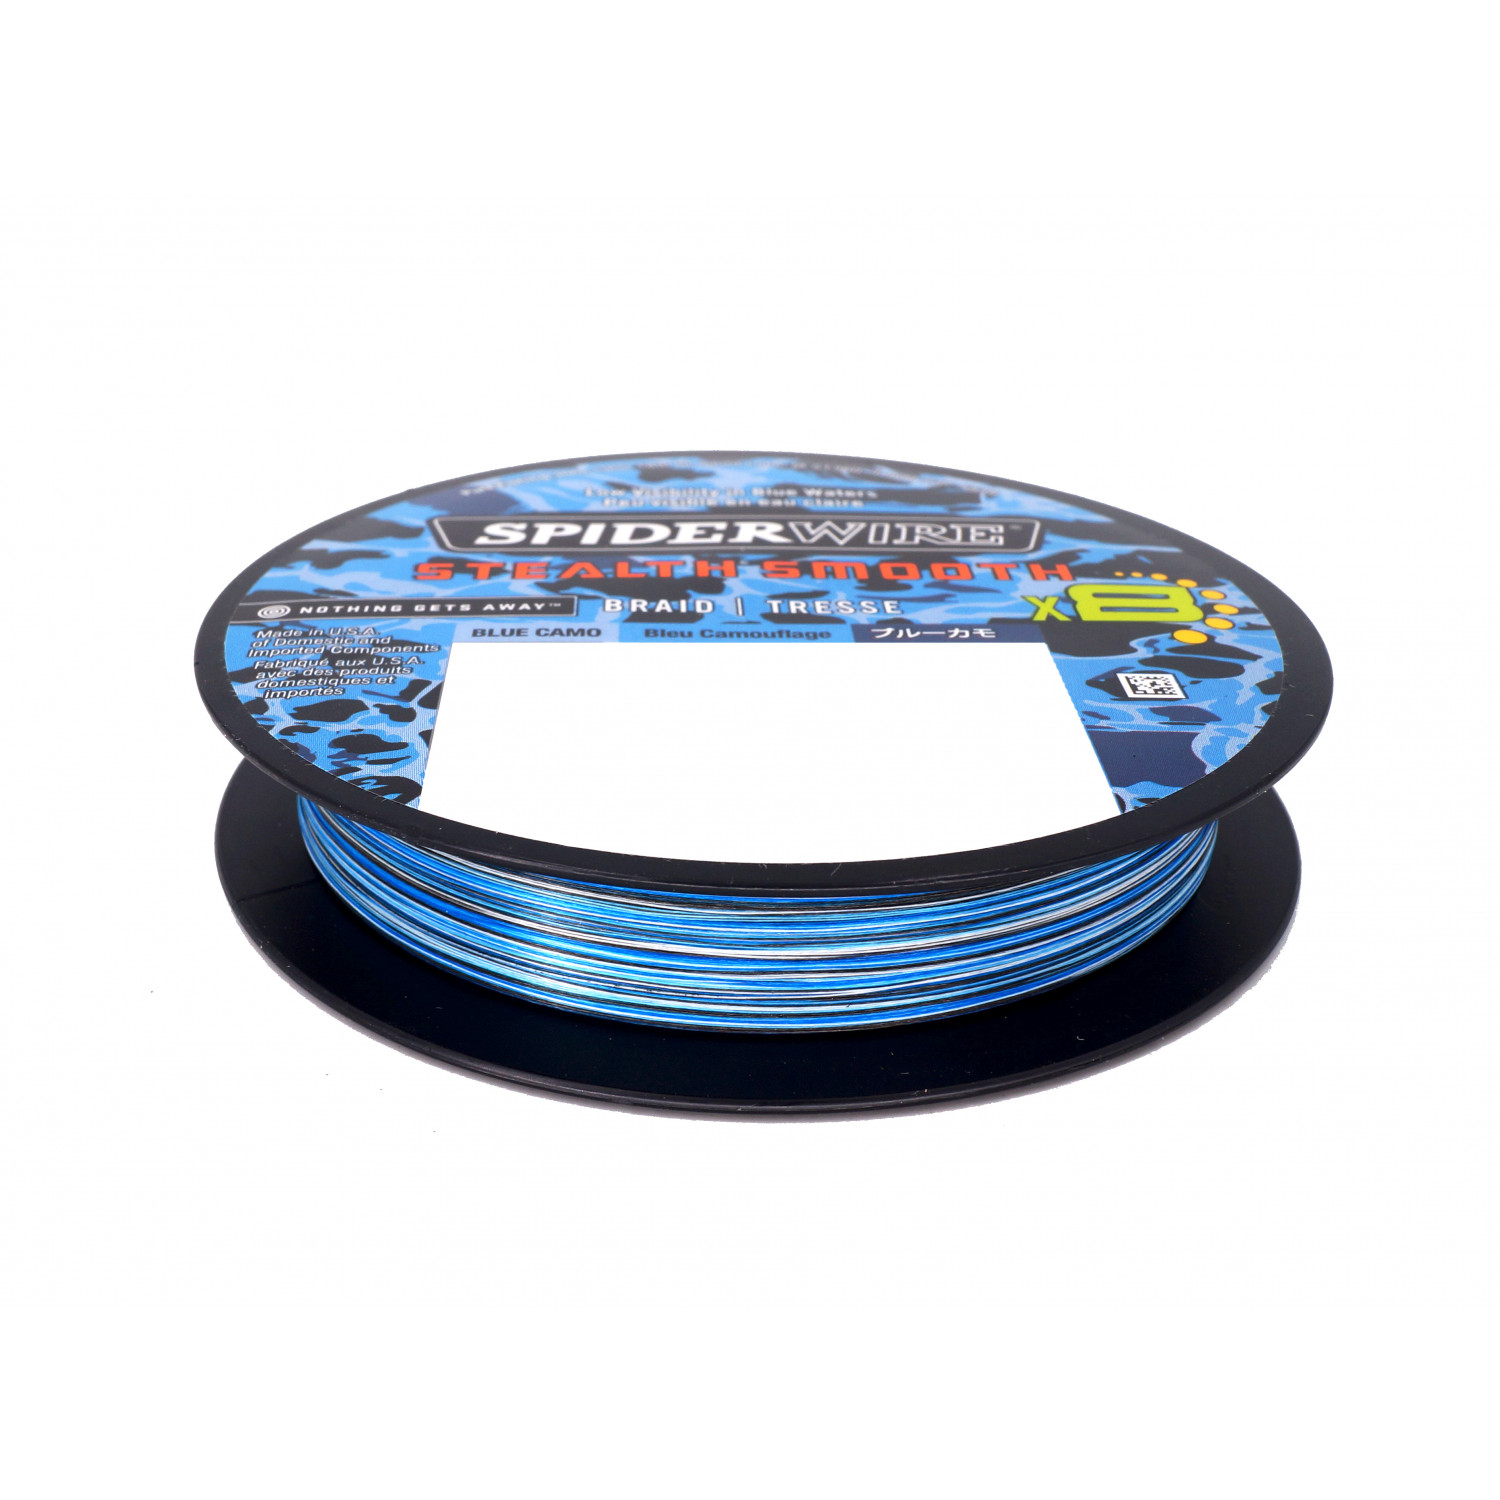 SPIDERWIRE Stealth Smooth braided fishing line camouflage blue 300